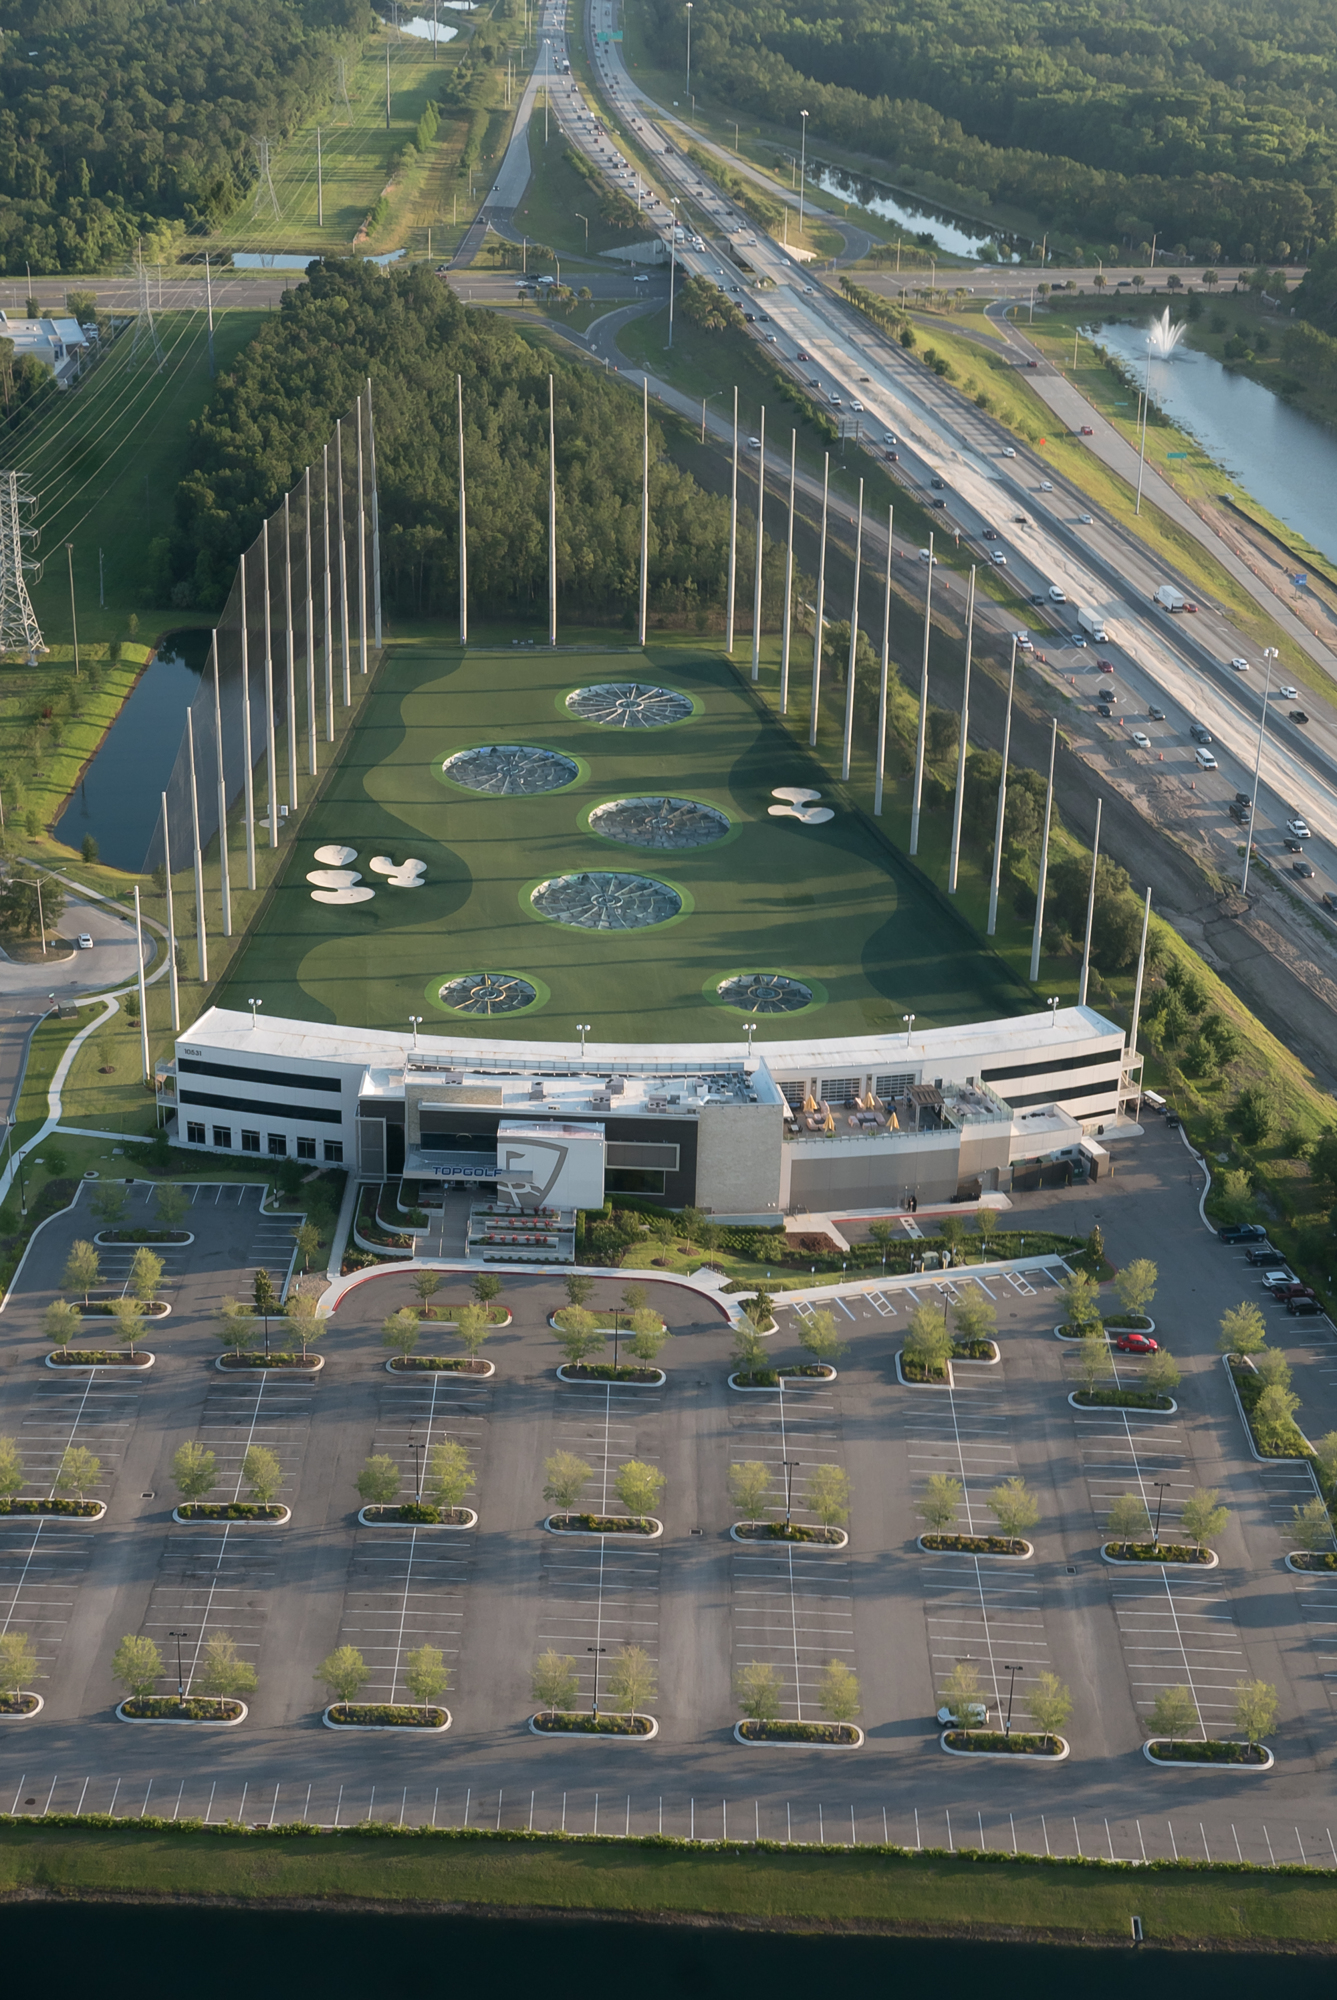 Topgolf is at 10531 Brightman Blvd. near Town Center and Butler Boulevard and Interstate 295.